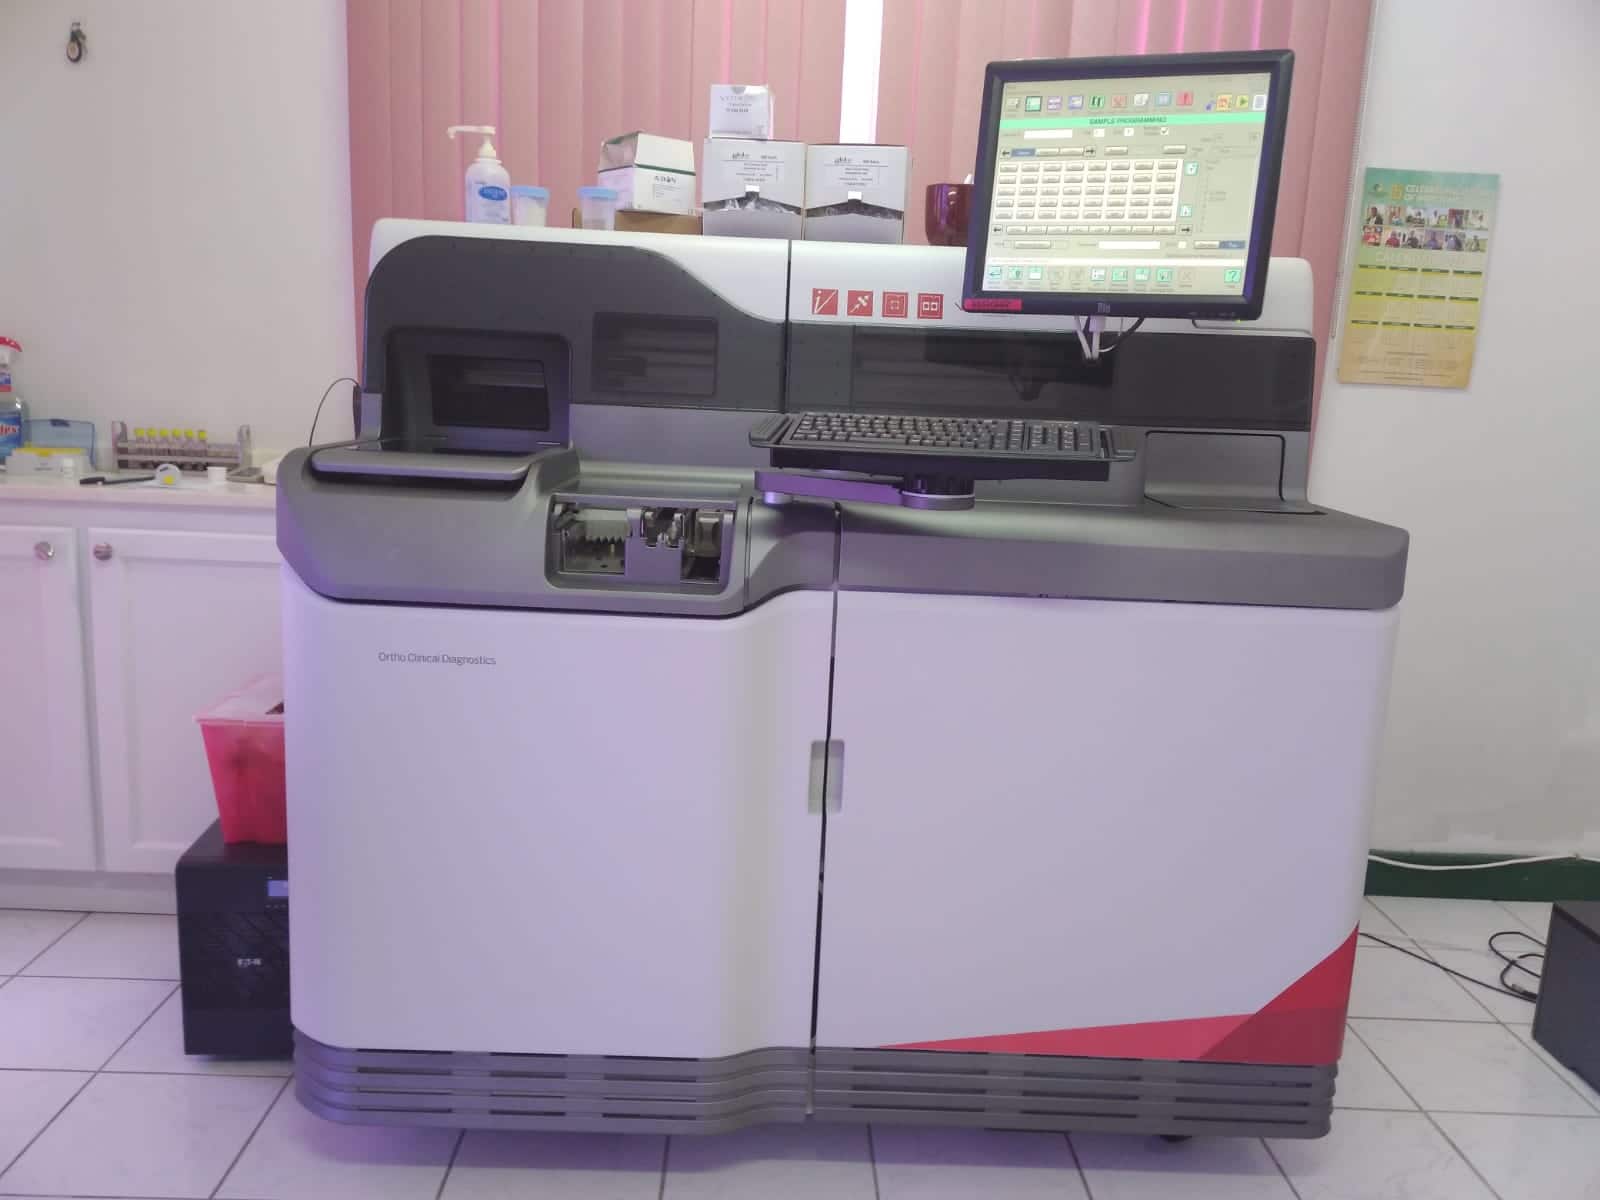 The newly installed and commissioned US$59,000. VITROS XT 3400 chemistry analyser purchased by the Ministry of Health in the Nevis Island Administration at the Alexandra Hospital’s Lab on March 25, 2021